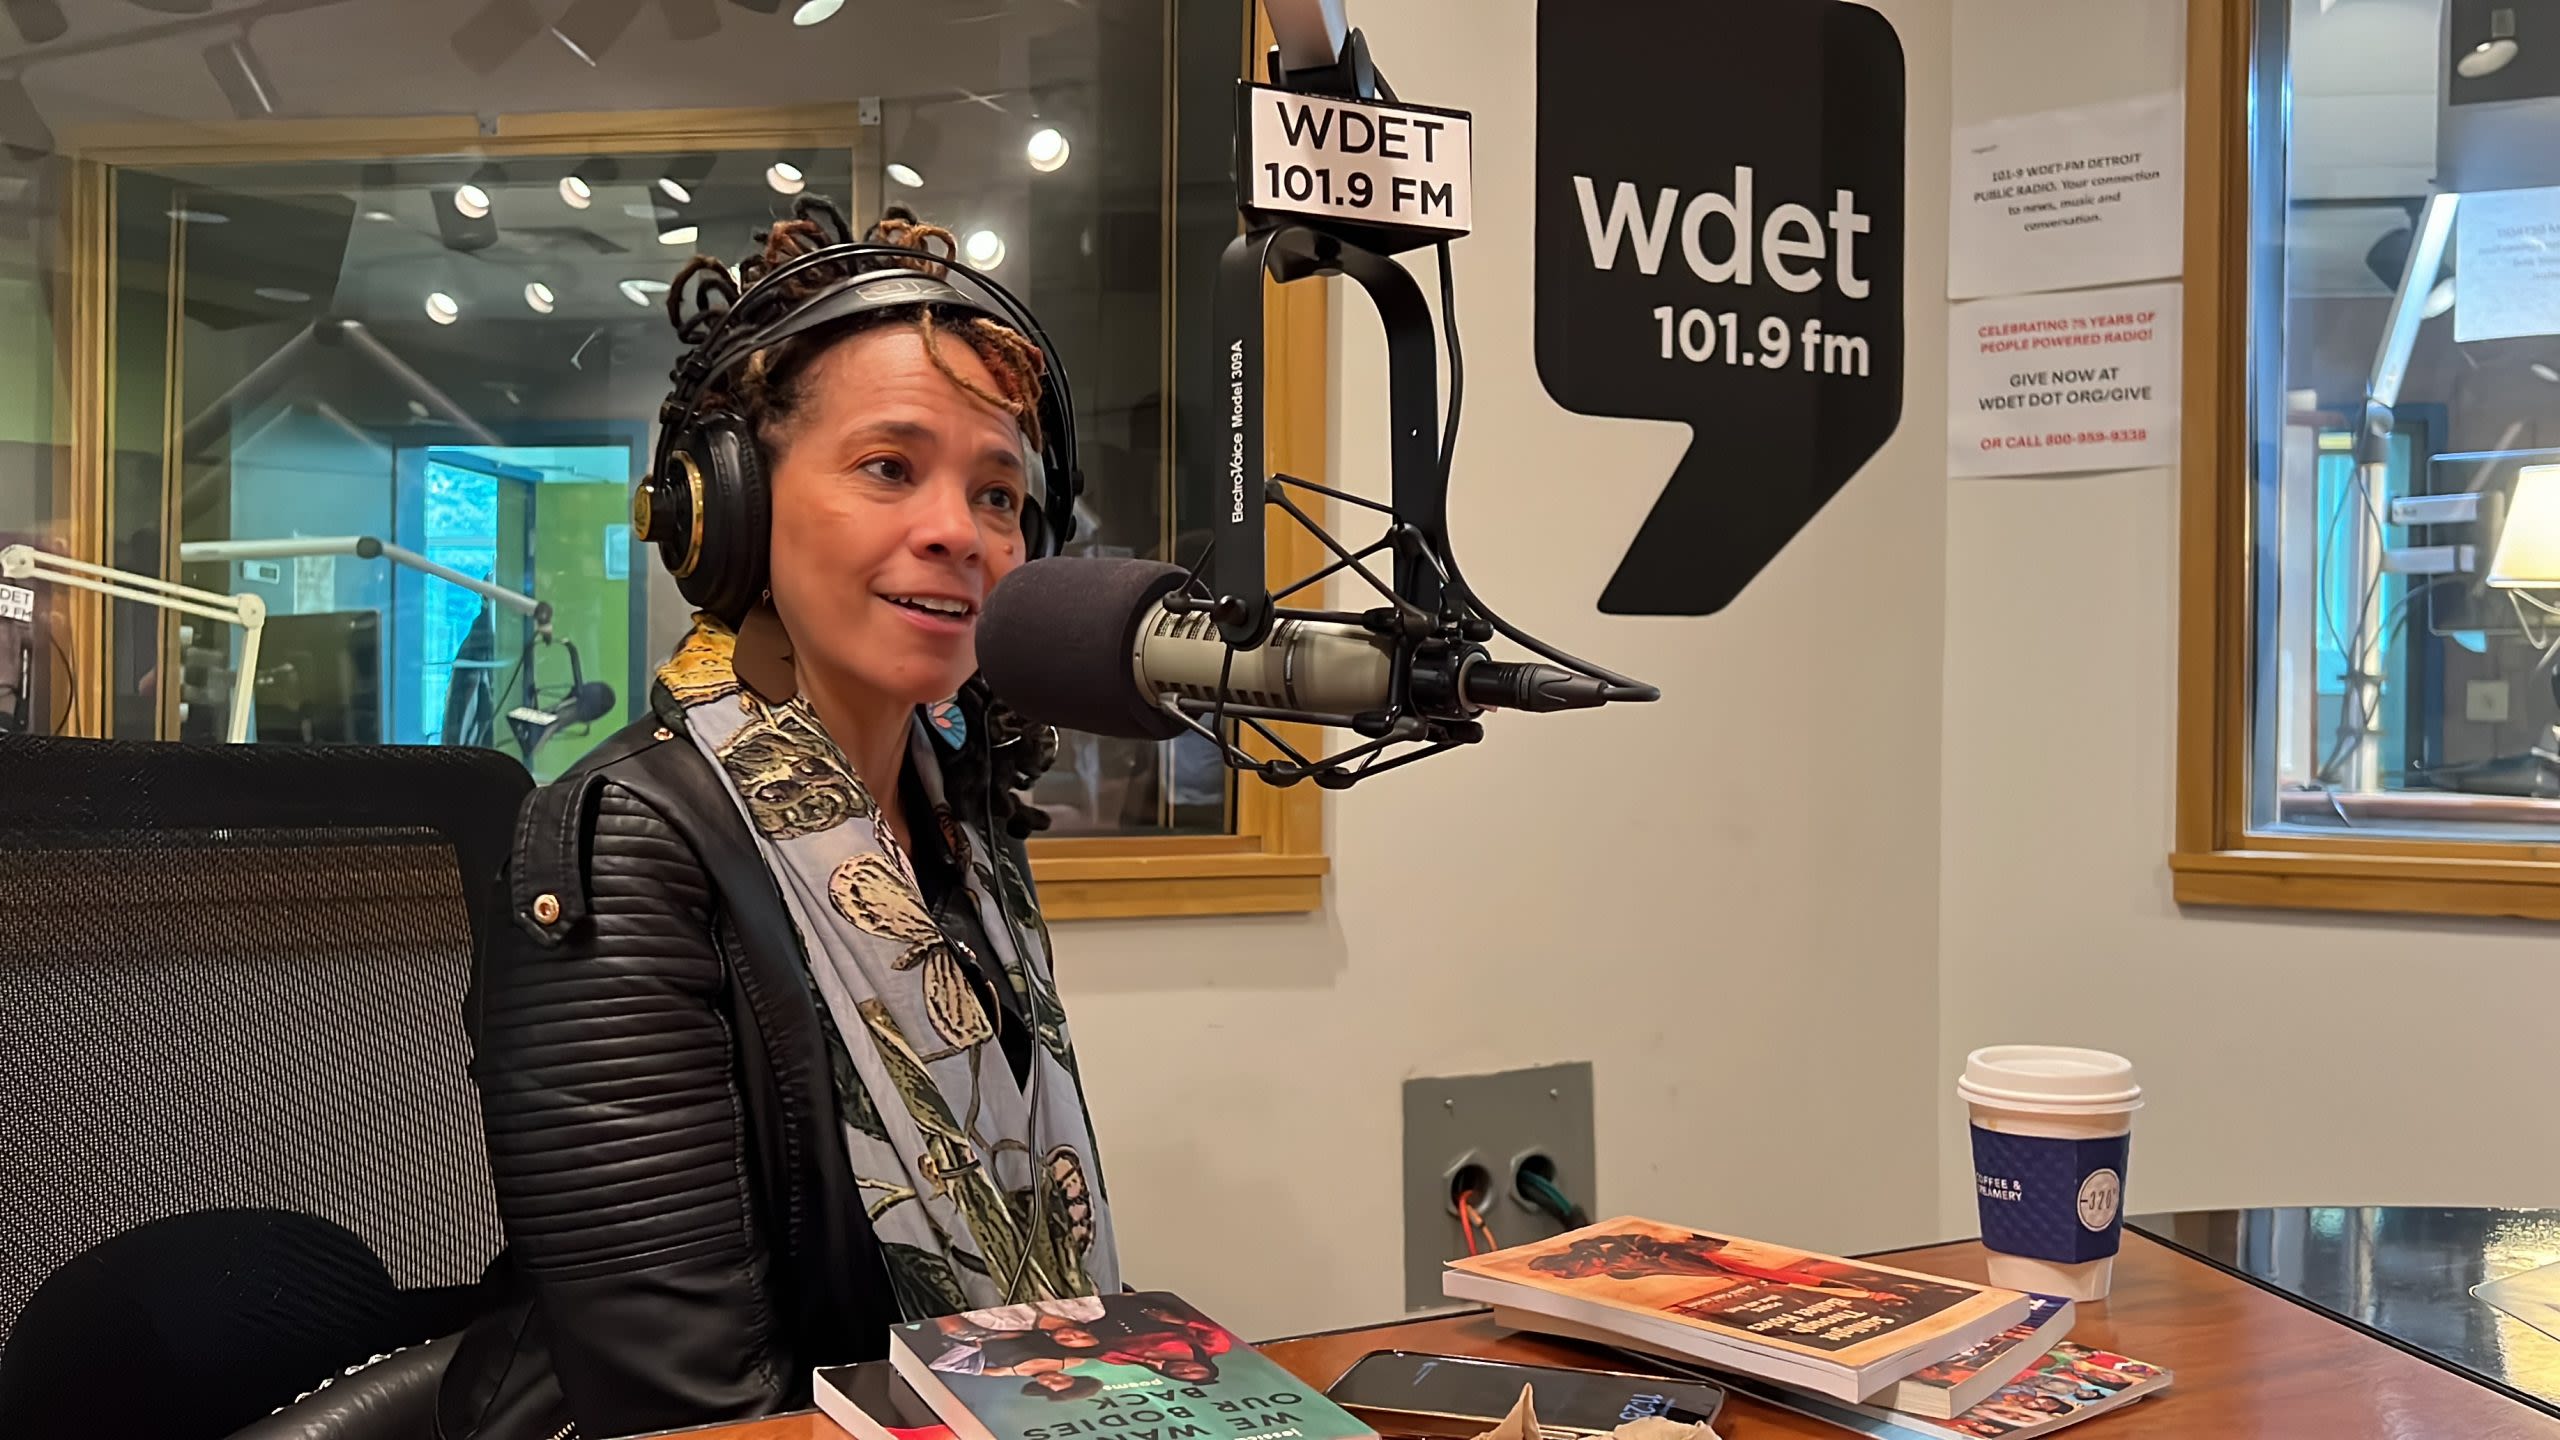 Detroit’s new poet laureate jessica Care moore shares her plans for the role - WDET 101.9 FM